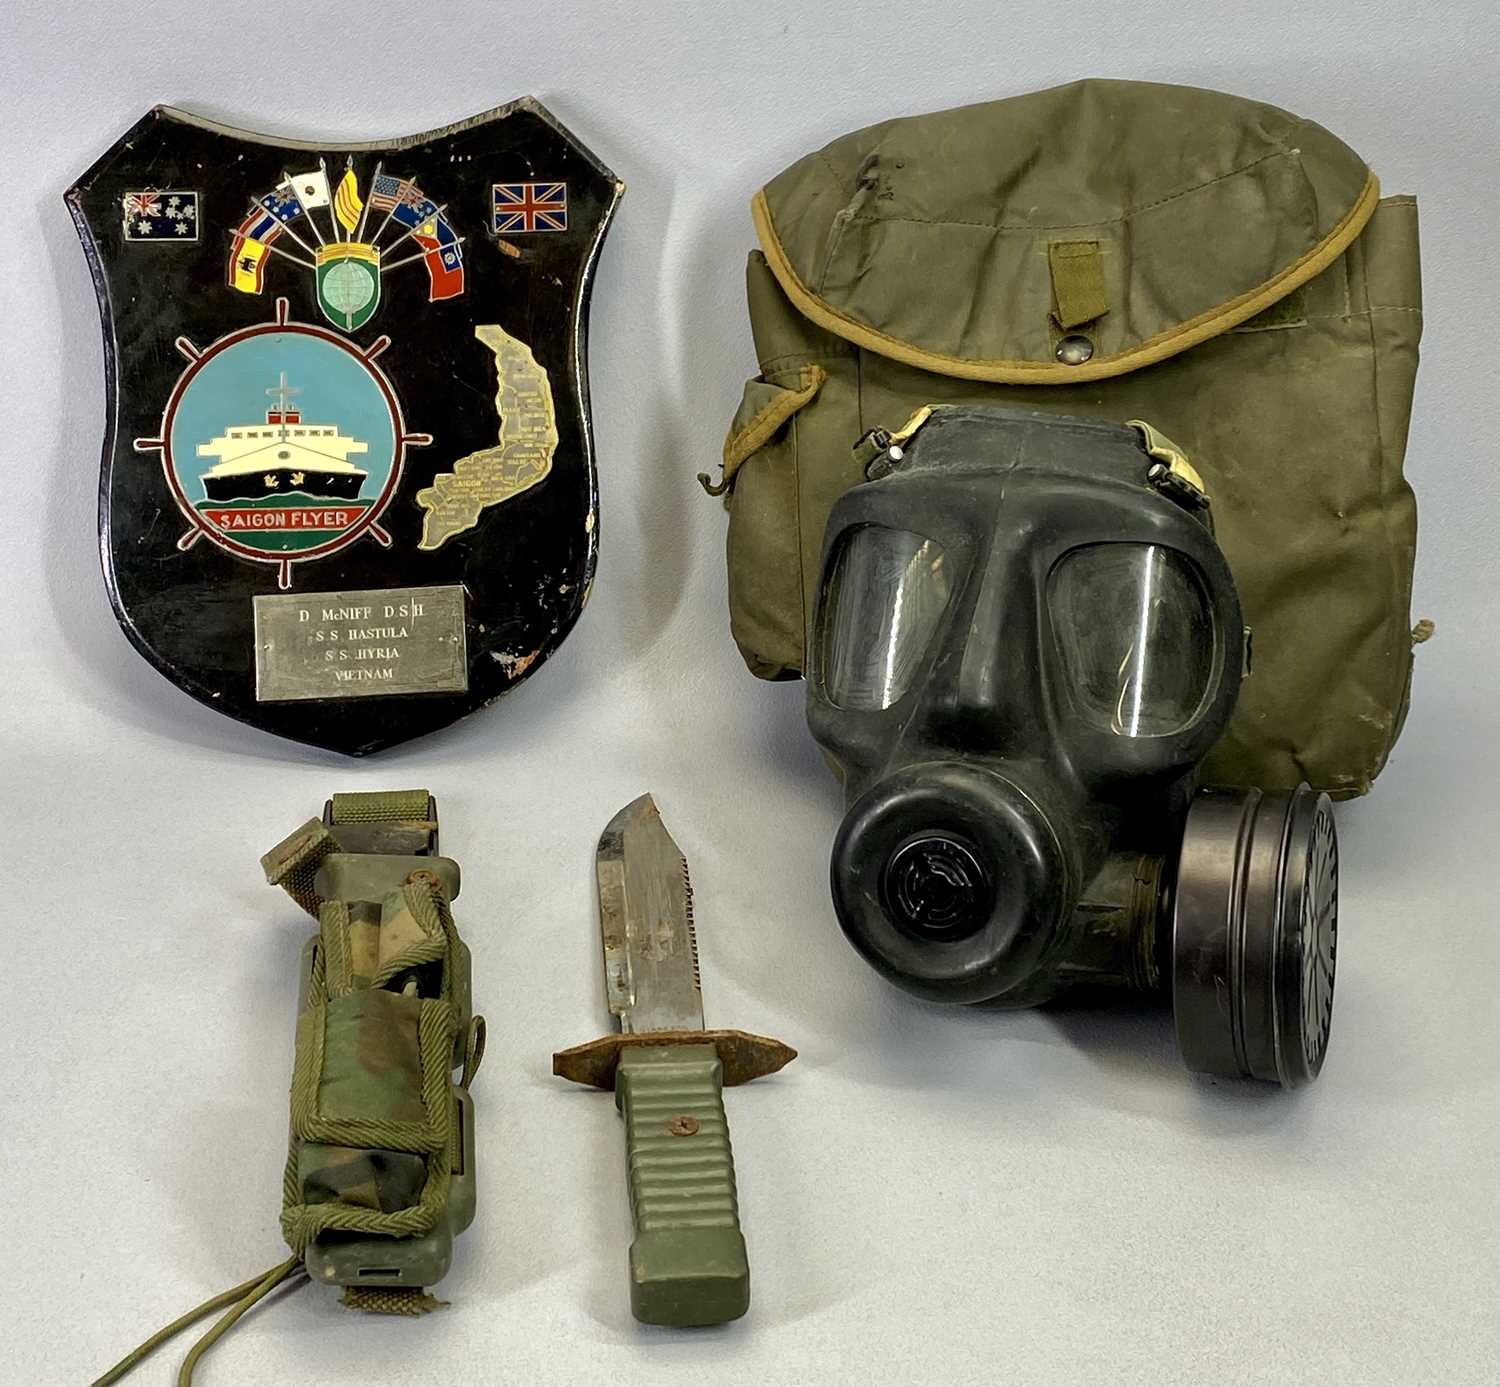 A GAS MASK IN CLOTH BAG, a sheath knife with 19cms blade and a wall plaque, Saigon Flyer, D McNiff